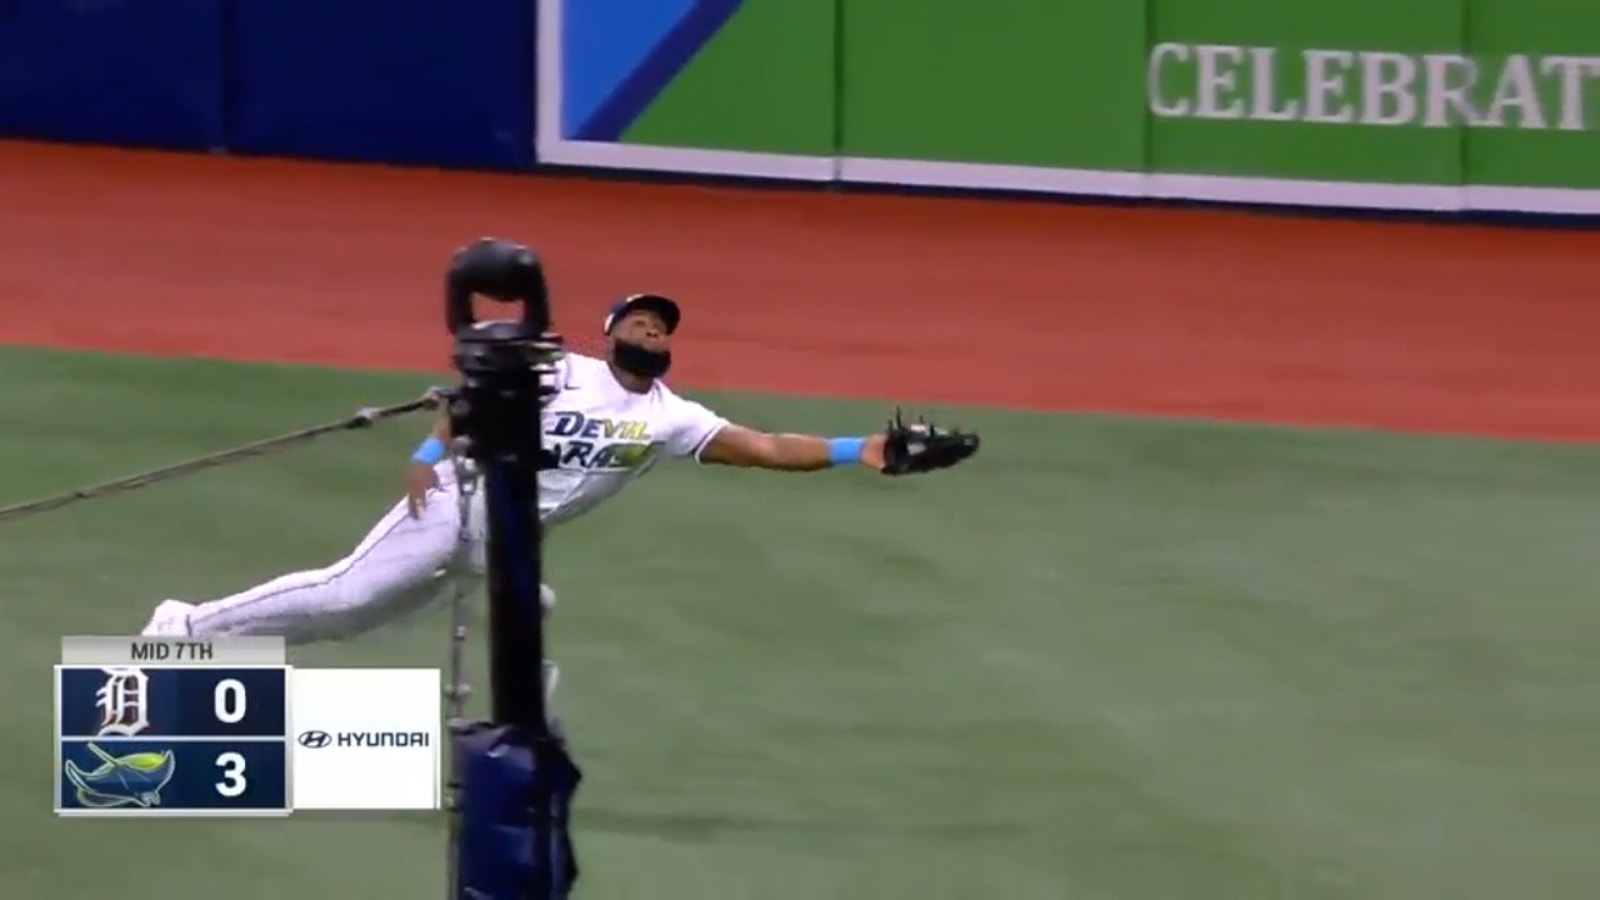 Rays' Manuel Margot makes an ABSURD diving catch against Tigers